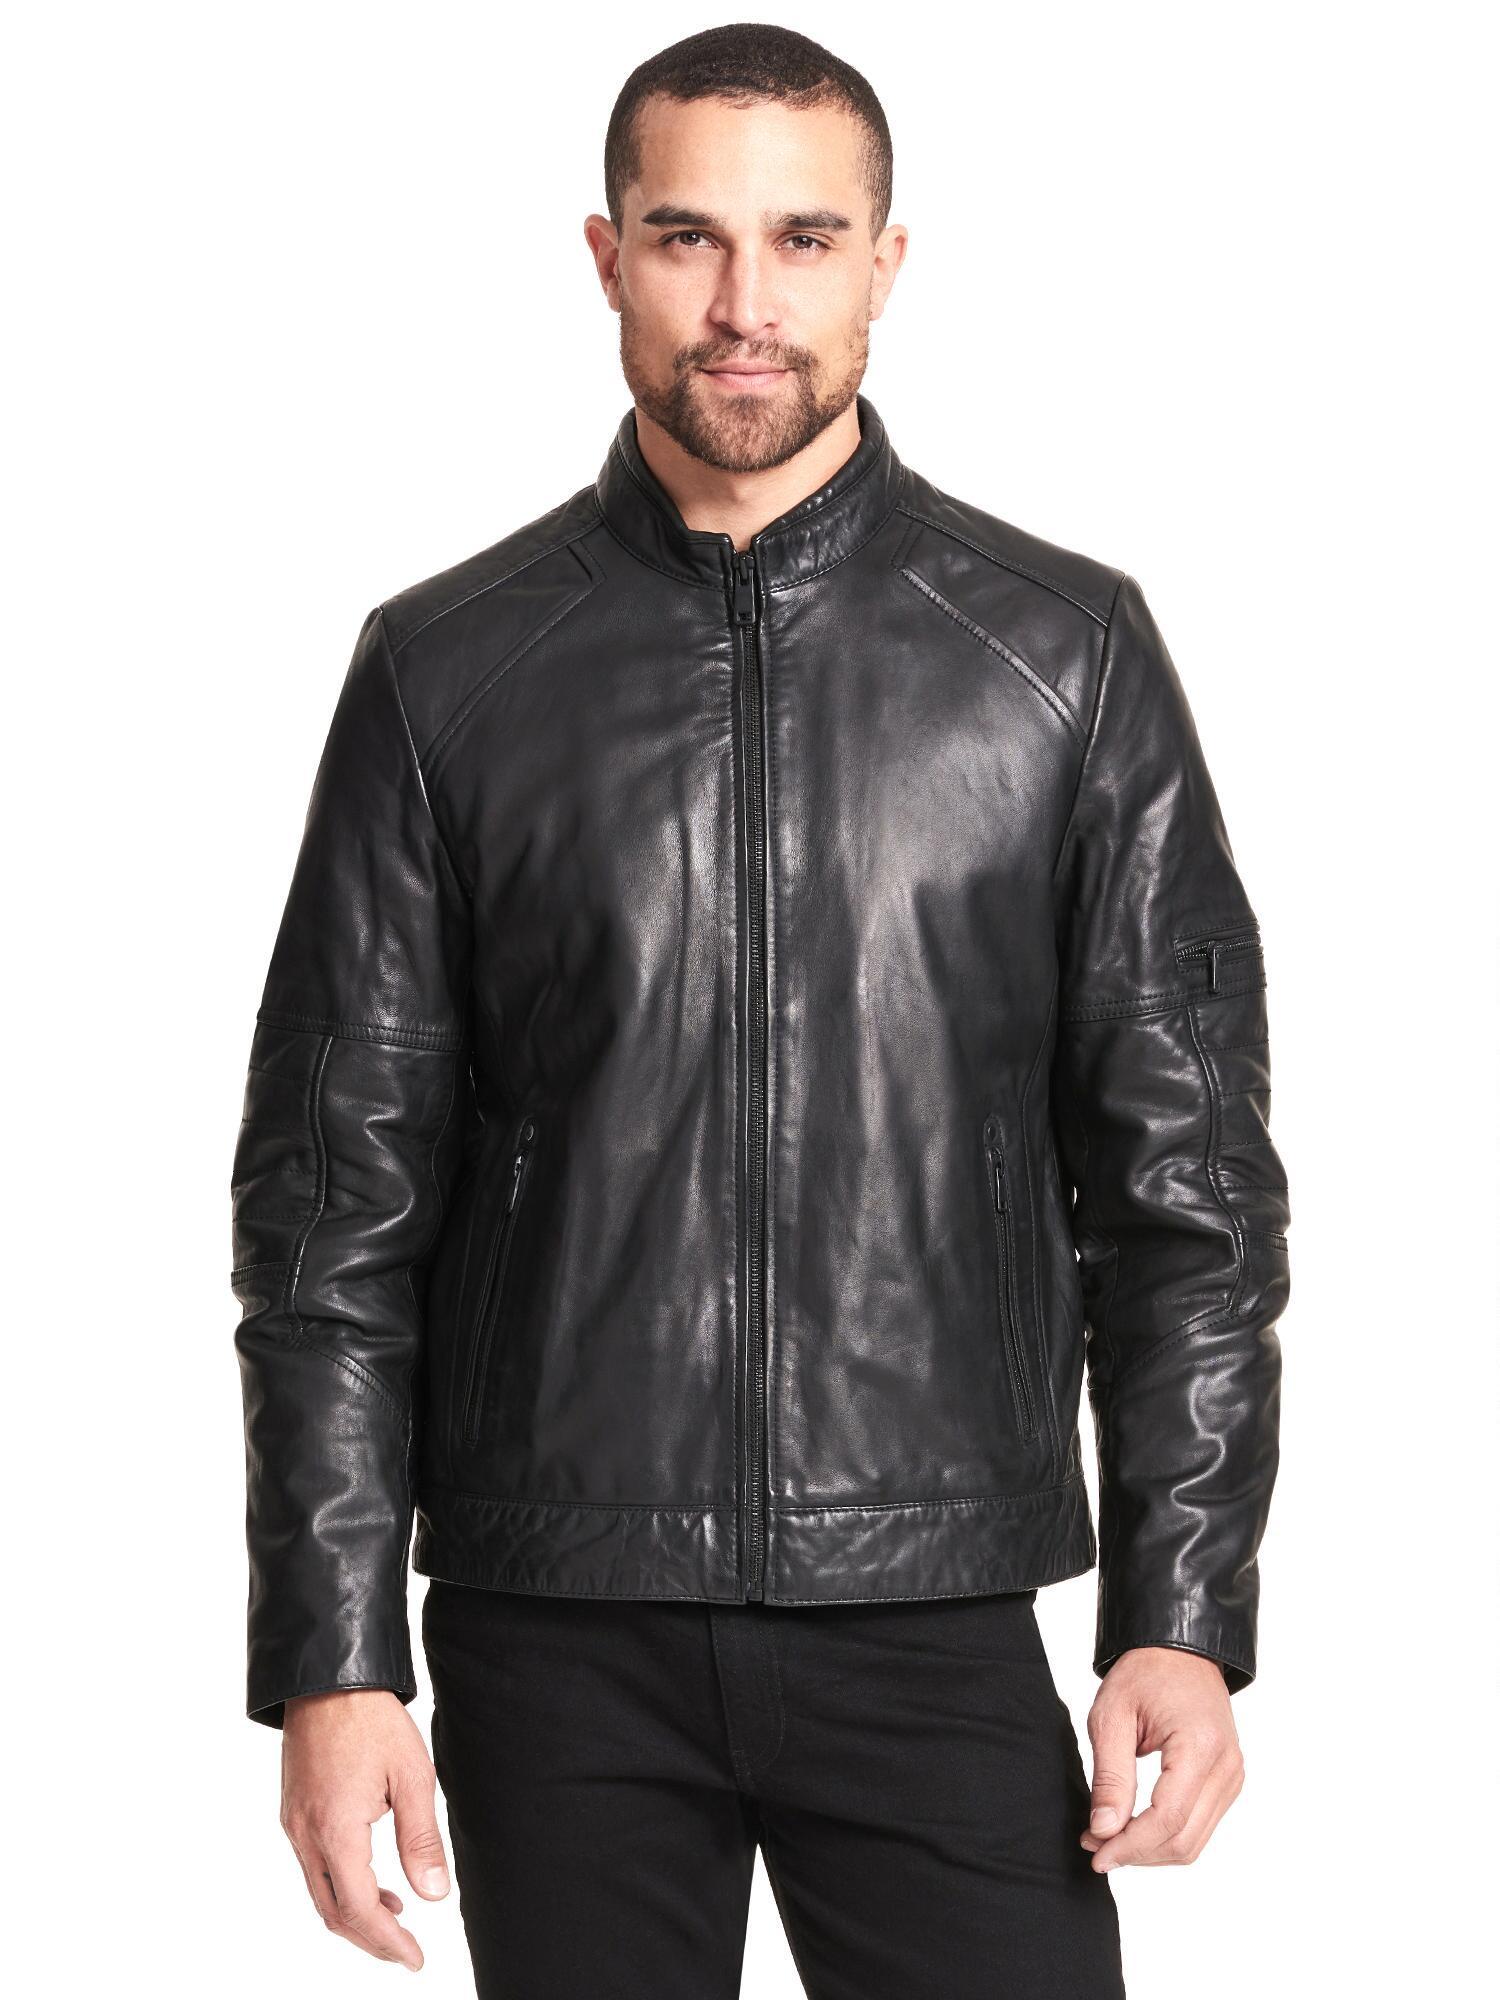 Wilsons Leather Toby Leather Jacket in Black for Men - Lyst